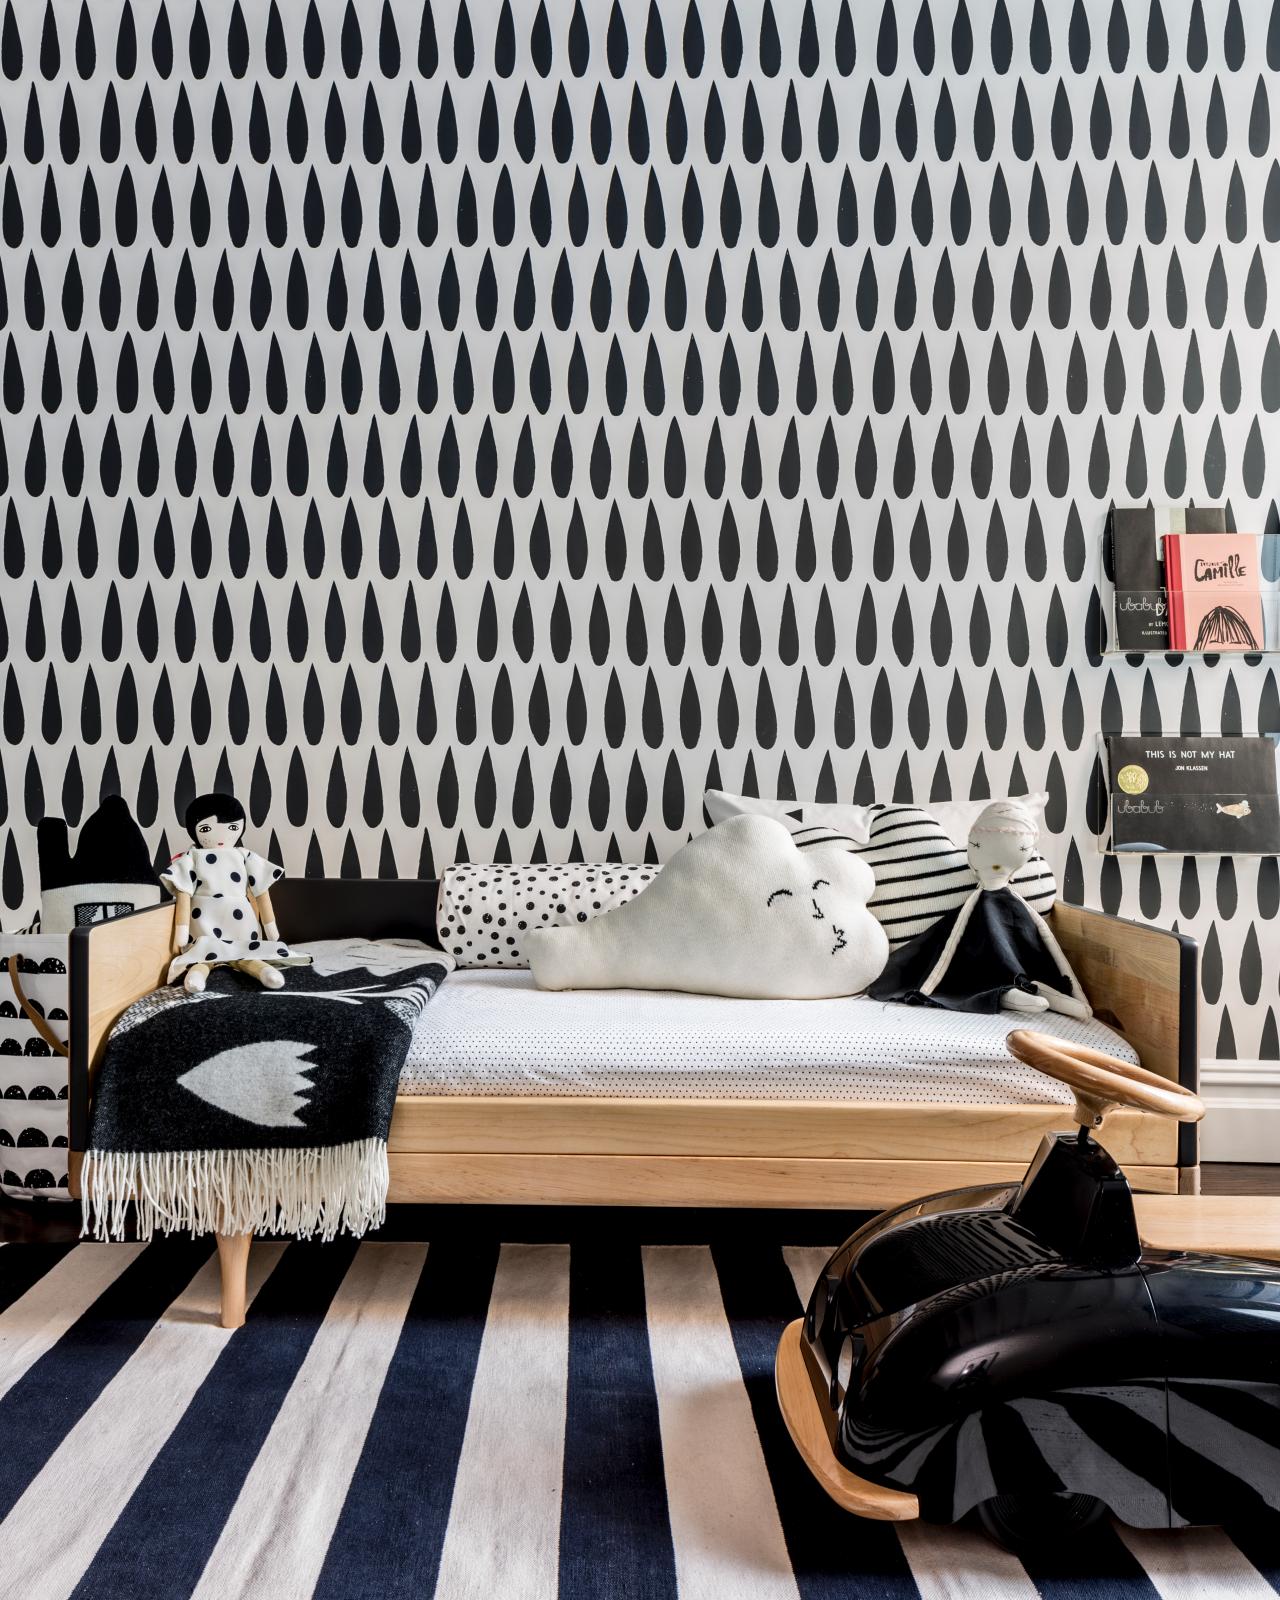 Playful Children S Room With Bold Wallpaper - Black White Grey Boys Room - HD Wallpaper 